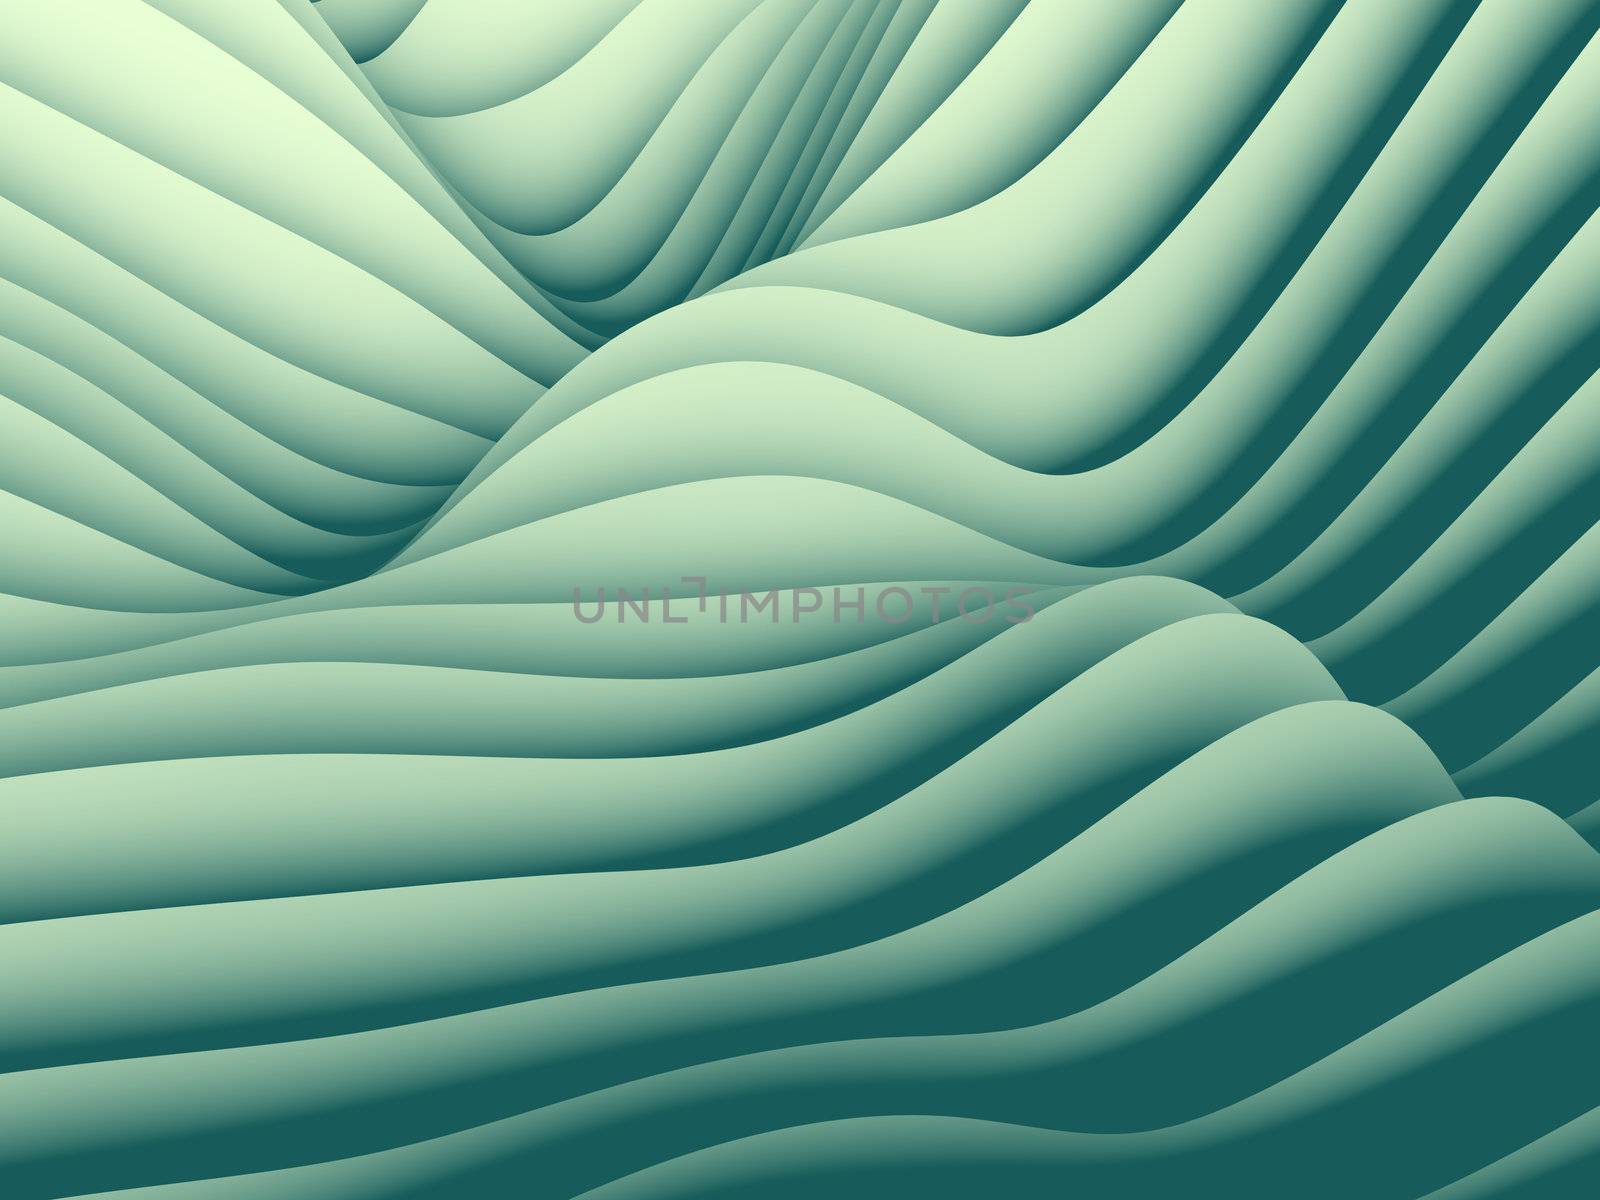 Dynamic background pattern of abstract overlapping undulating waves